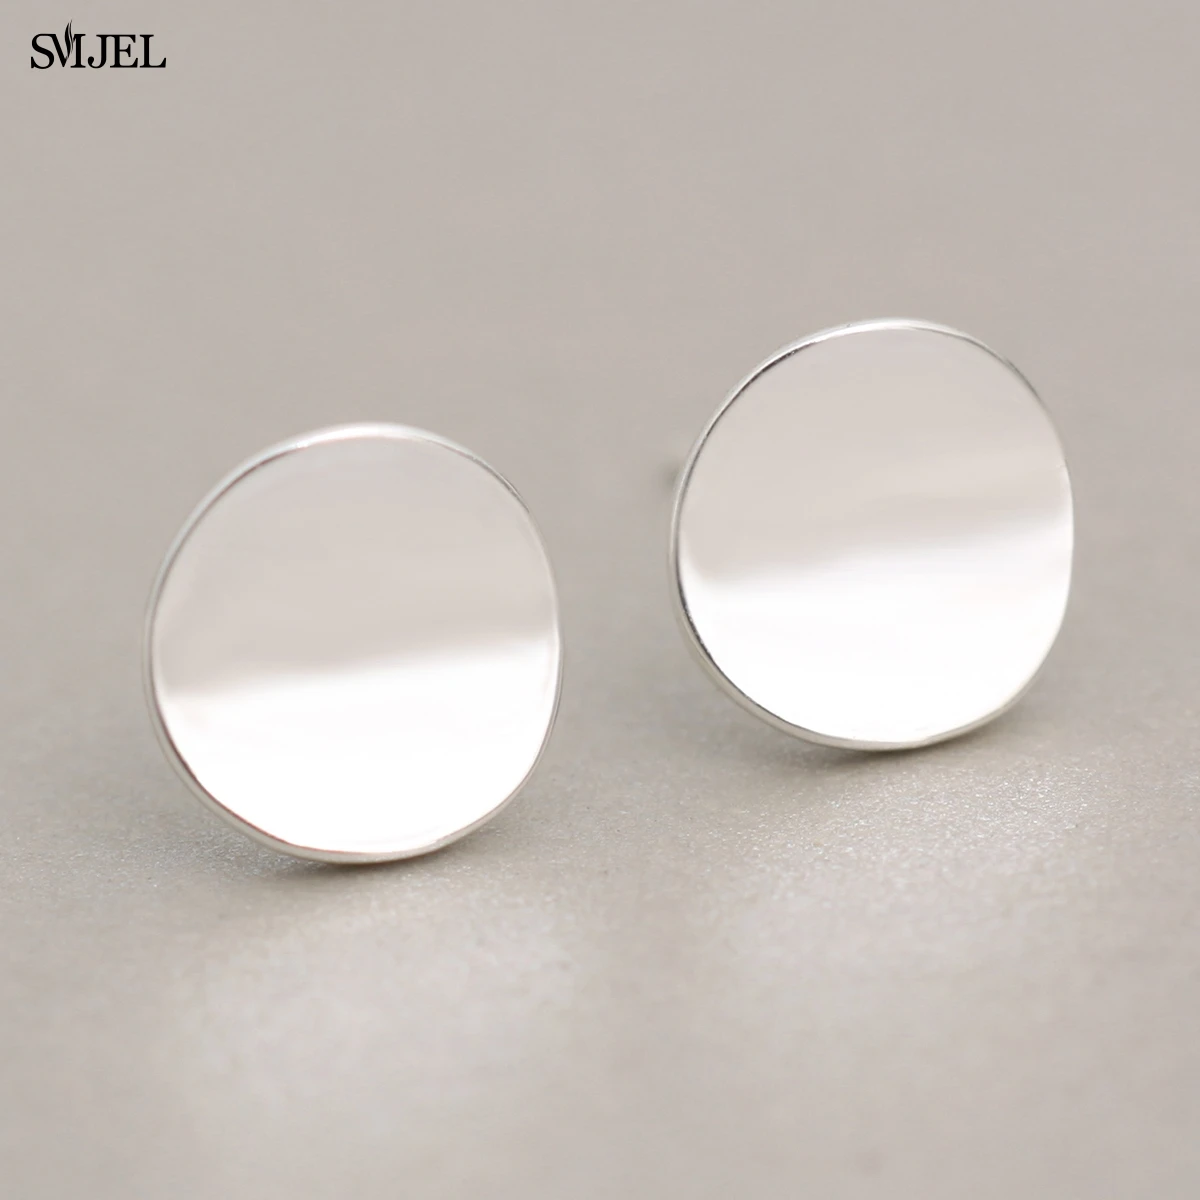 

SMJEL 2018 New Fashion Circle Earrings Shiny Geometric Round Stud Earrings for Women pendientes Party bijoux Accessary Jewelry